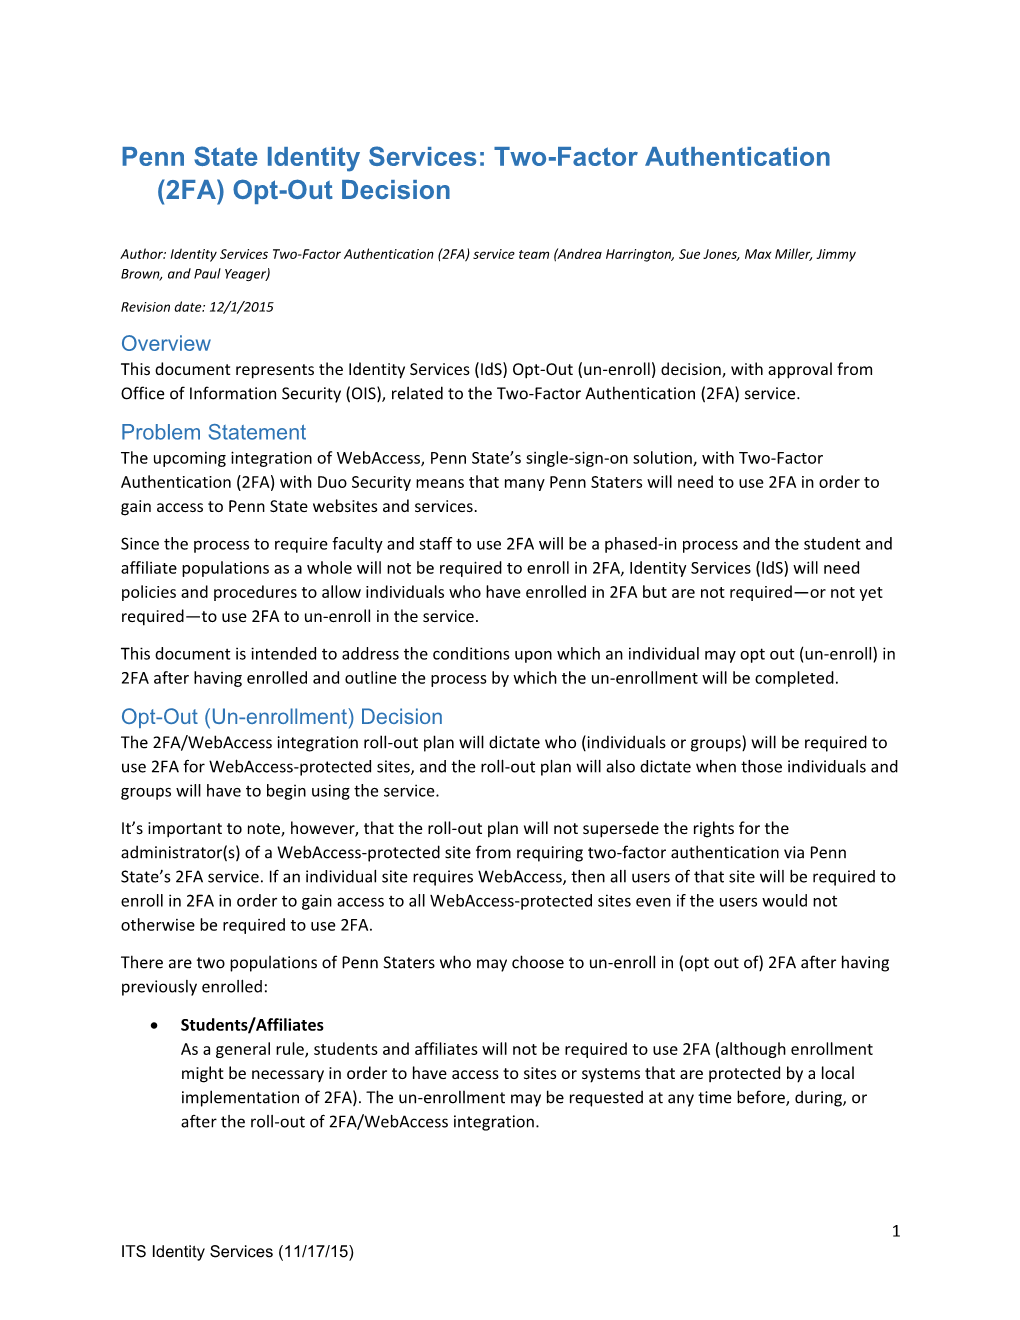 Penn State Identity Services: Two-Factor Authentication (2FA) Opt-Out Decision